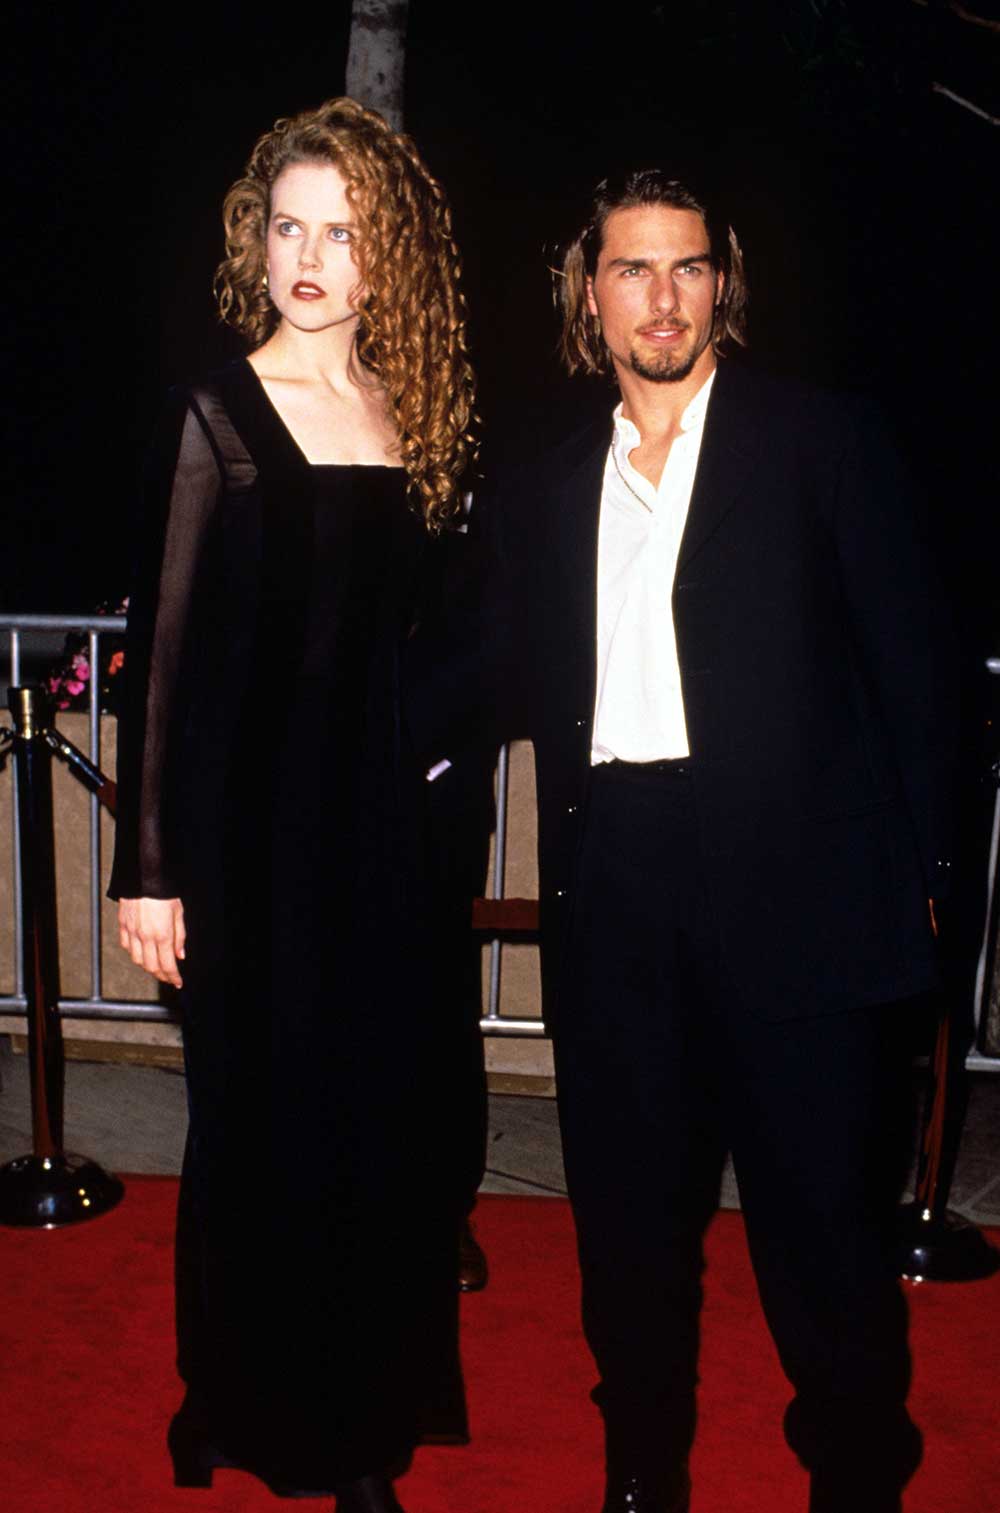 Nicole and Tom attend the premiere of Mary Shelly's Frankenstein in LA.